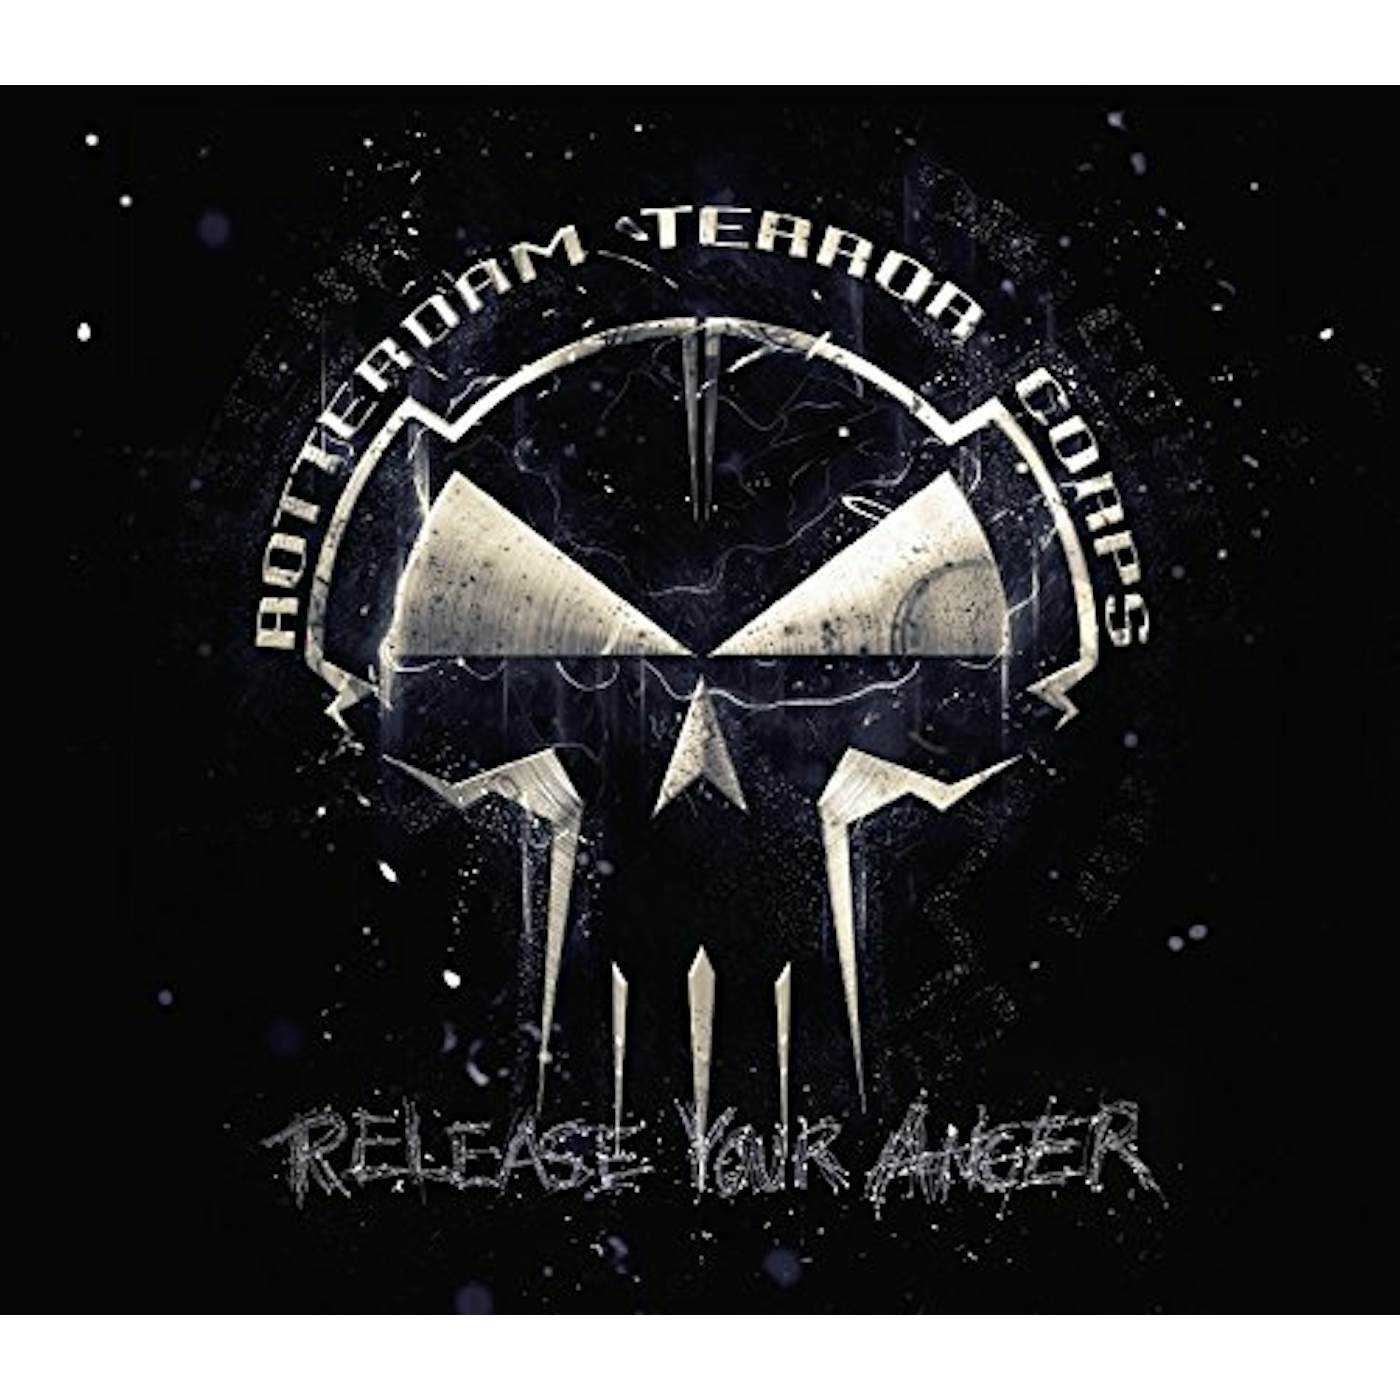 Rotterdam Terror Corps RELEASE YOUR ANGER CD